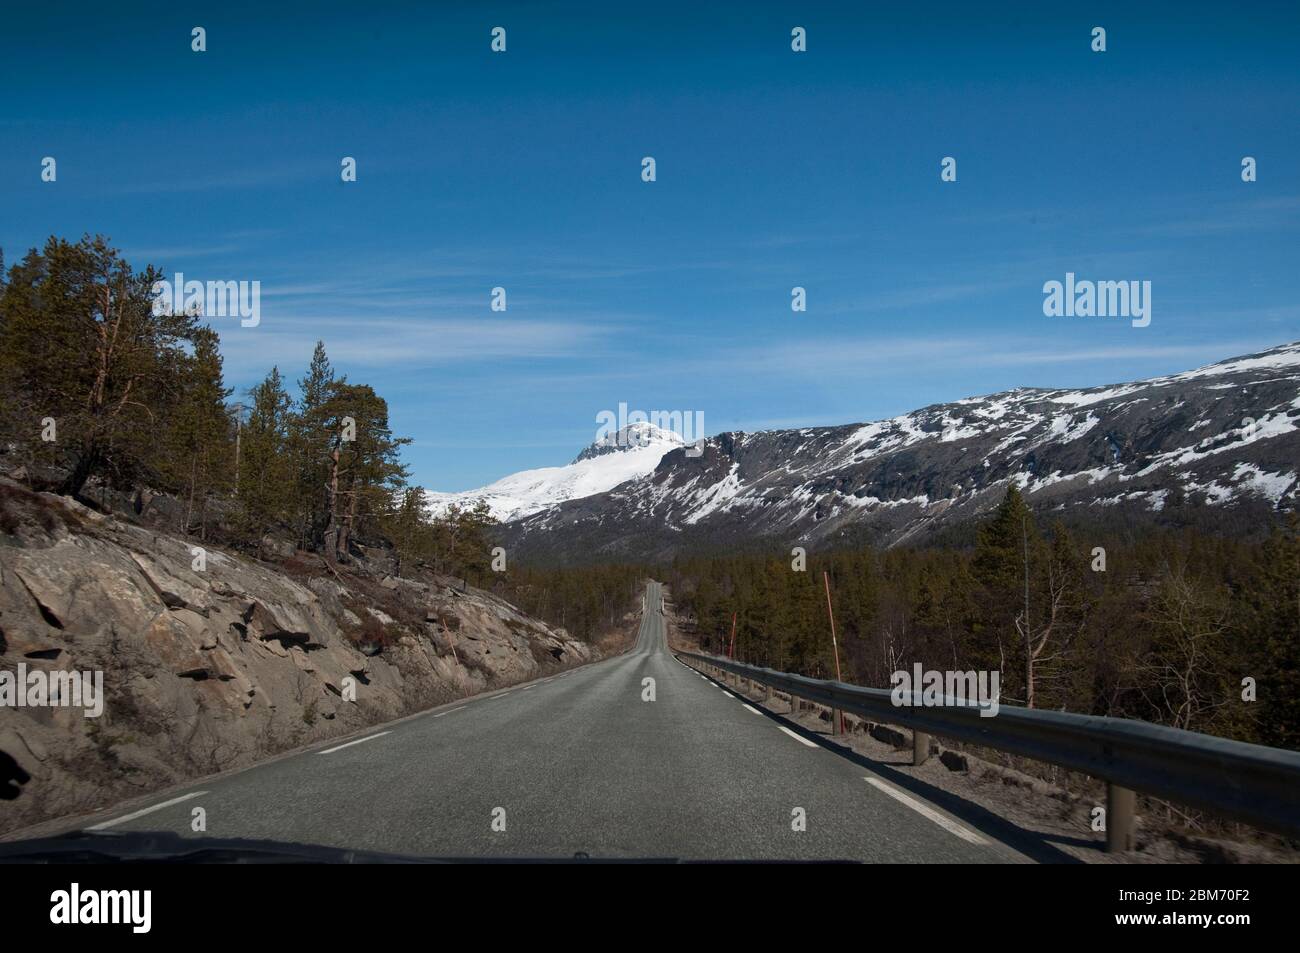 Norway mountains road view in spring Stock Photo